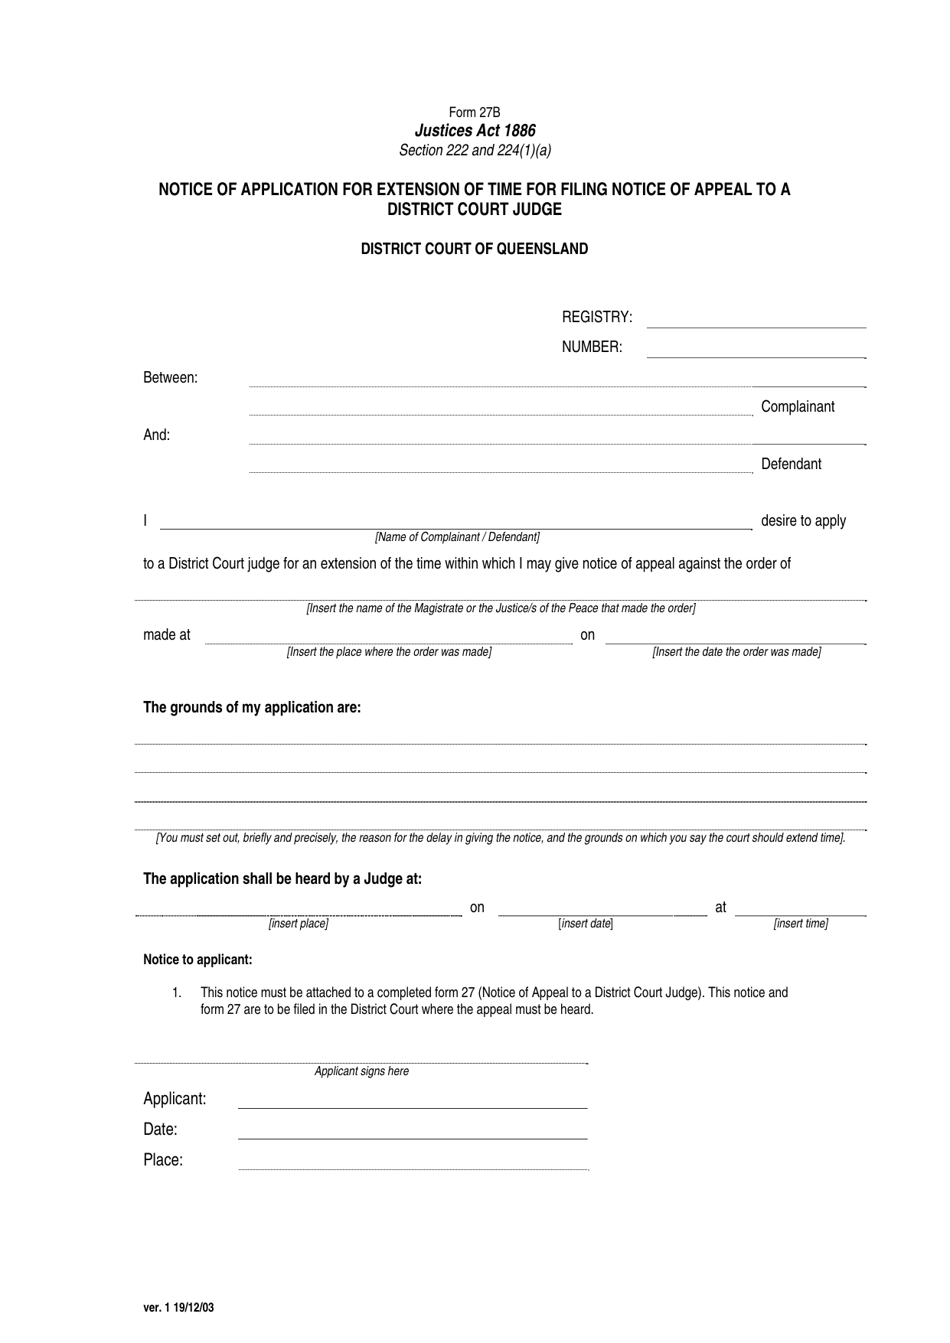 Form 27B Notice of Application for Extension of Time for Filing Notice of Appeal to a District Court Judge - Queensland, Australia, Page 1